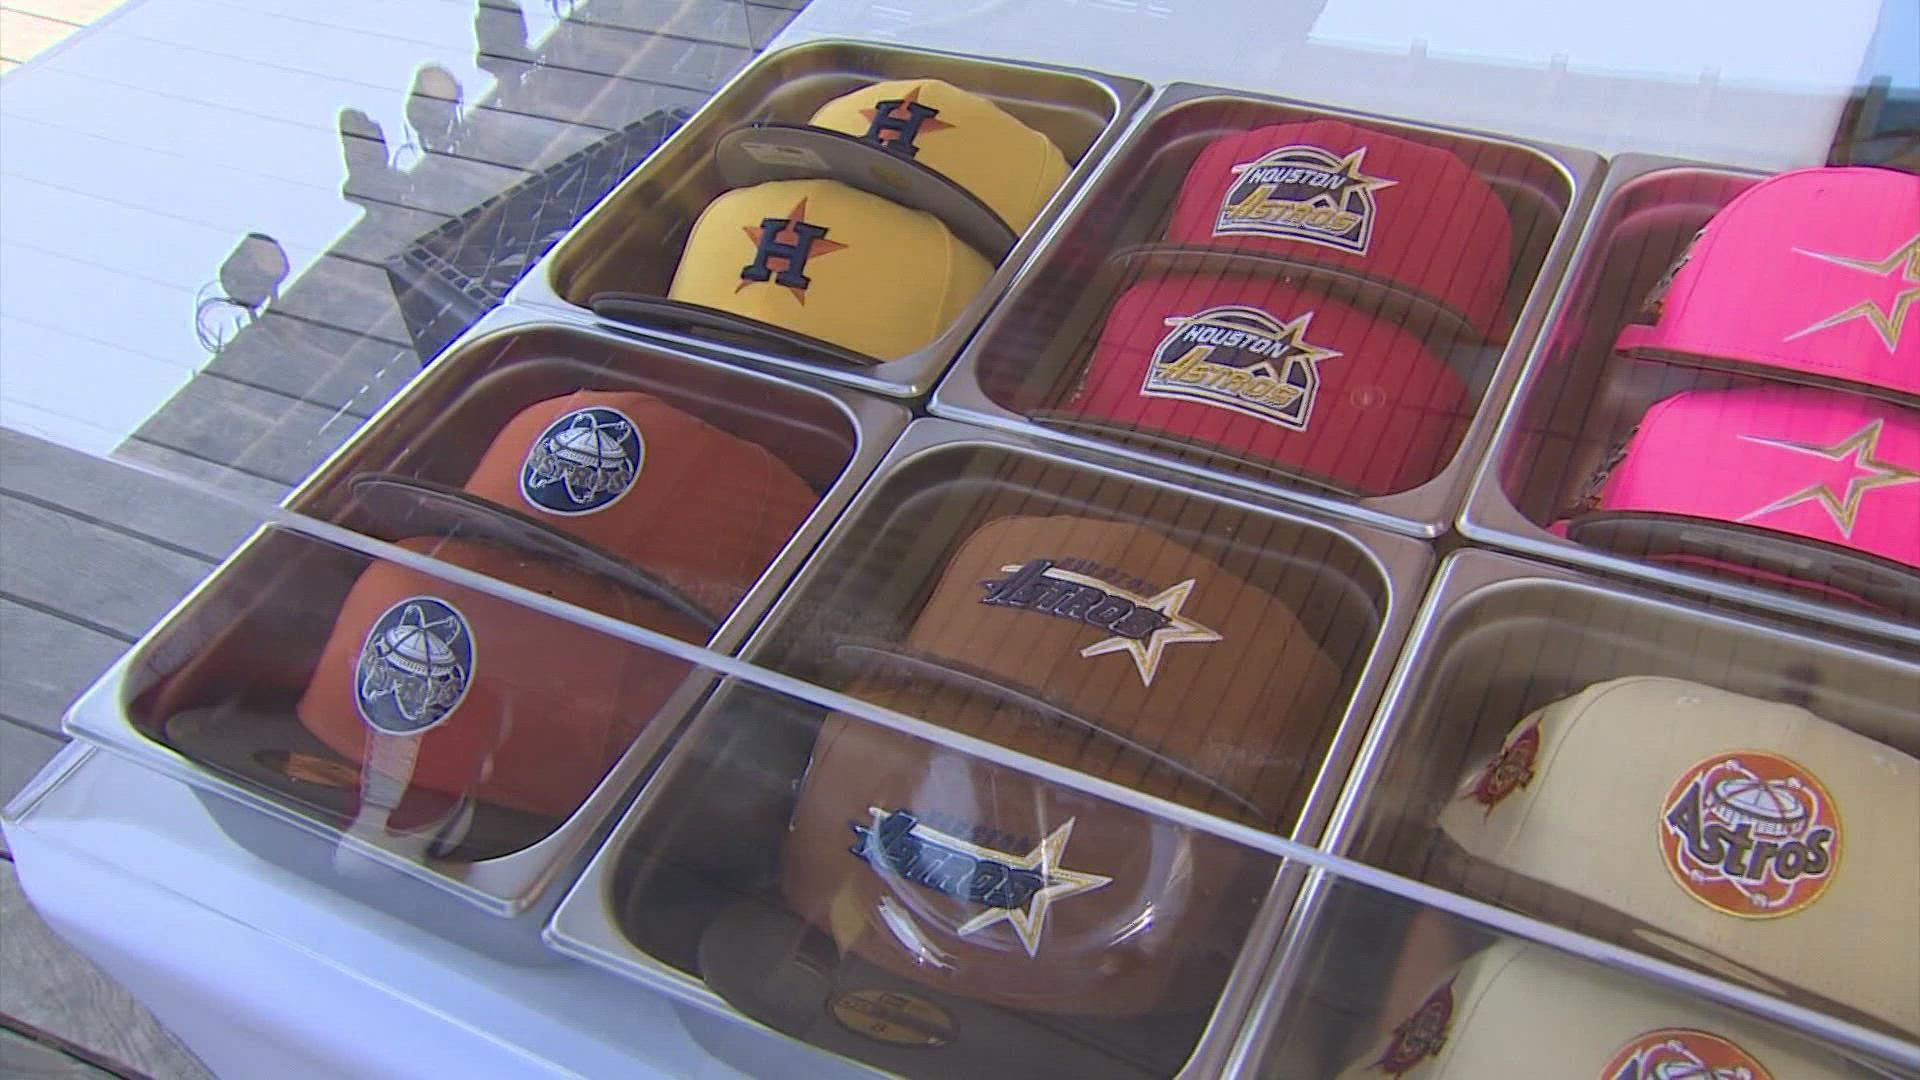 Bling out your Astros gear for less - ABC13 Houston